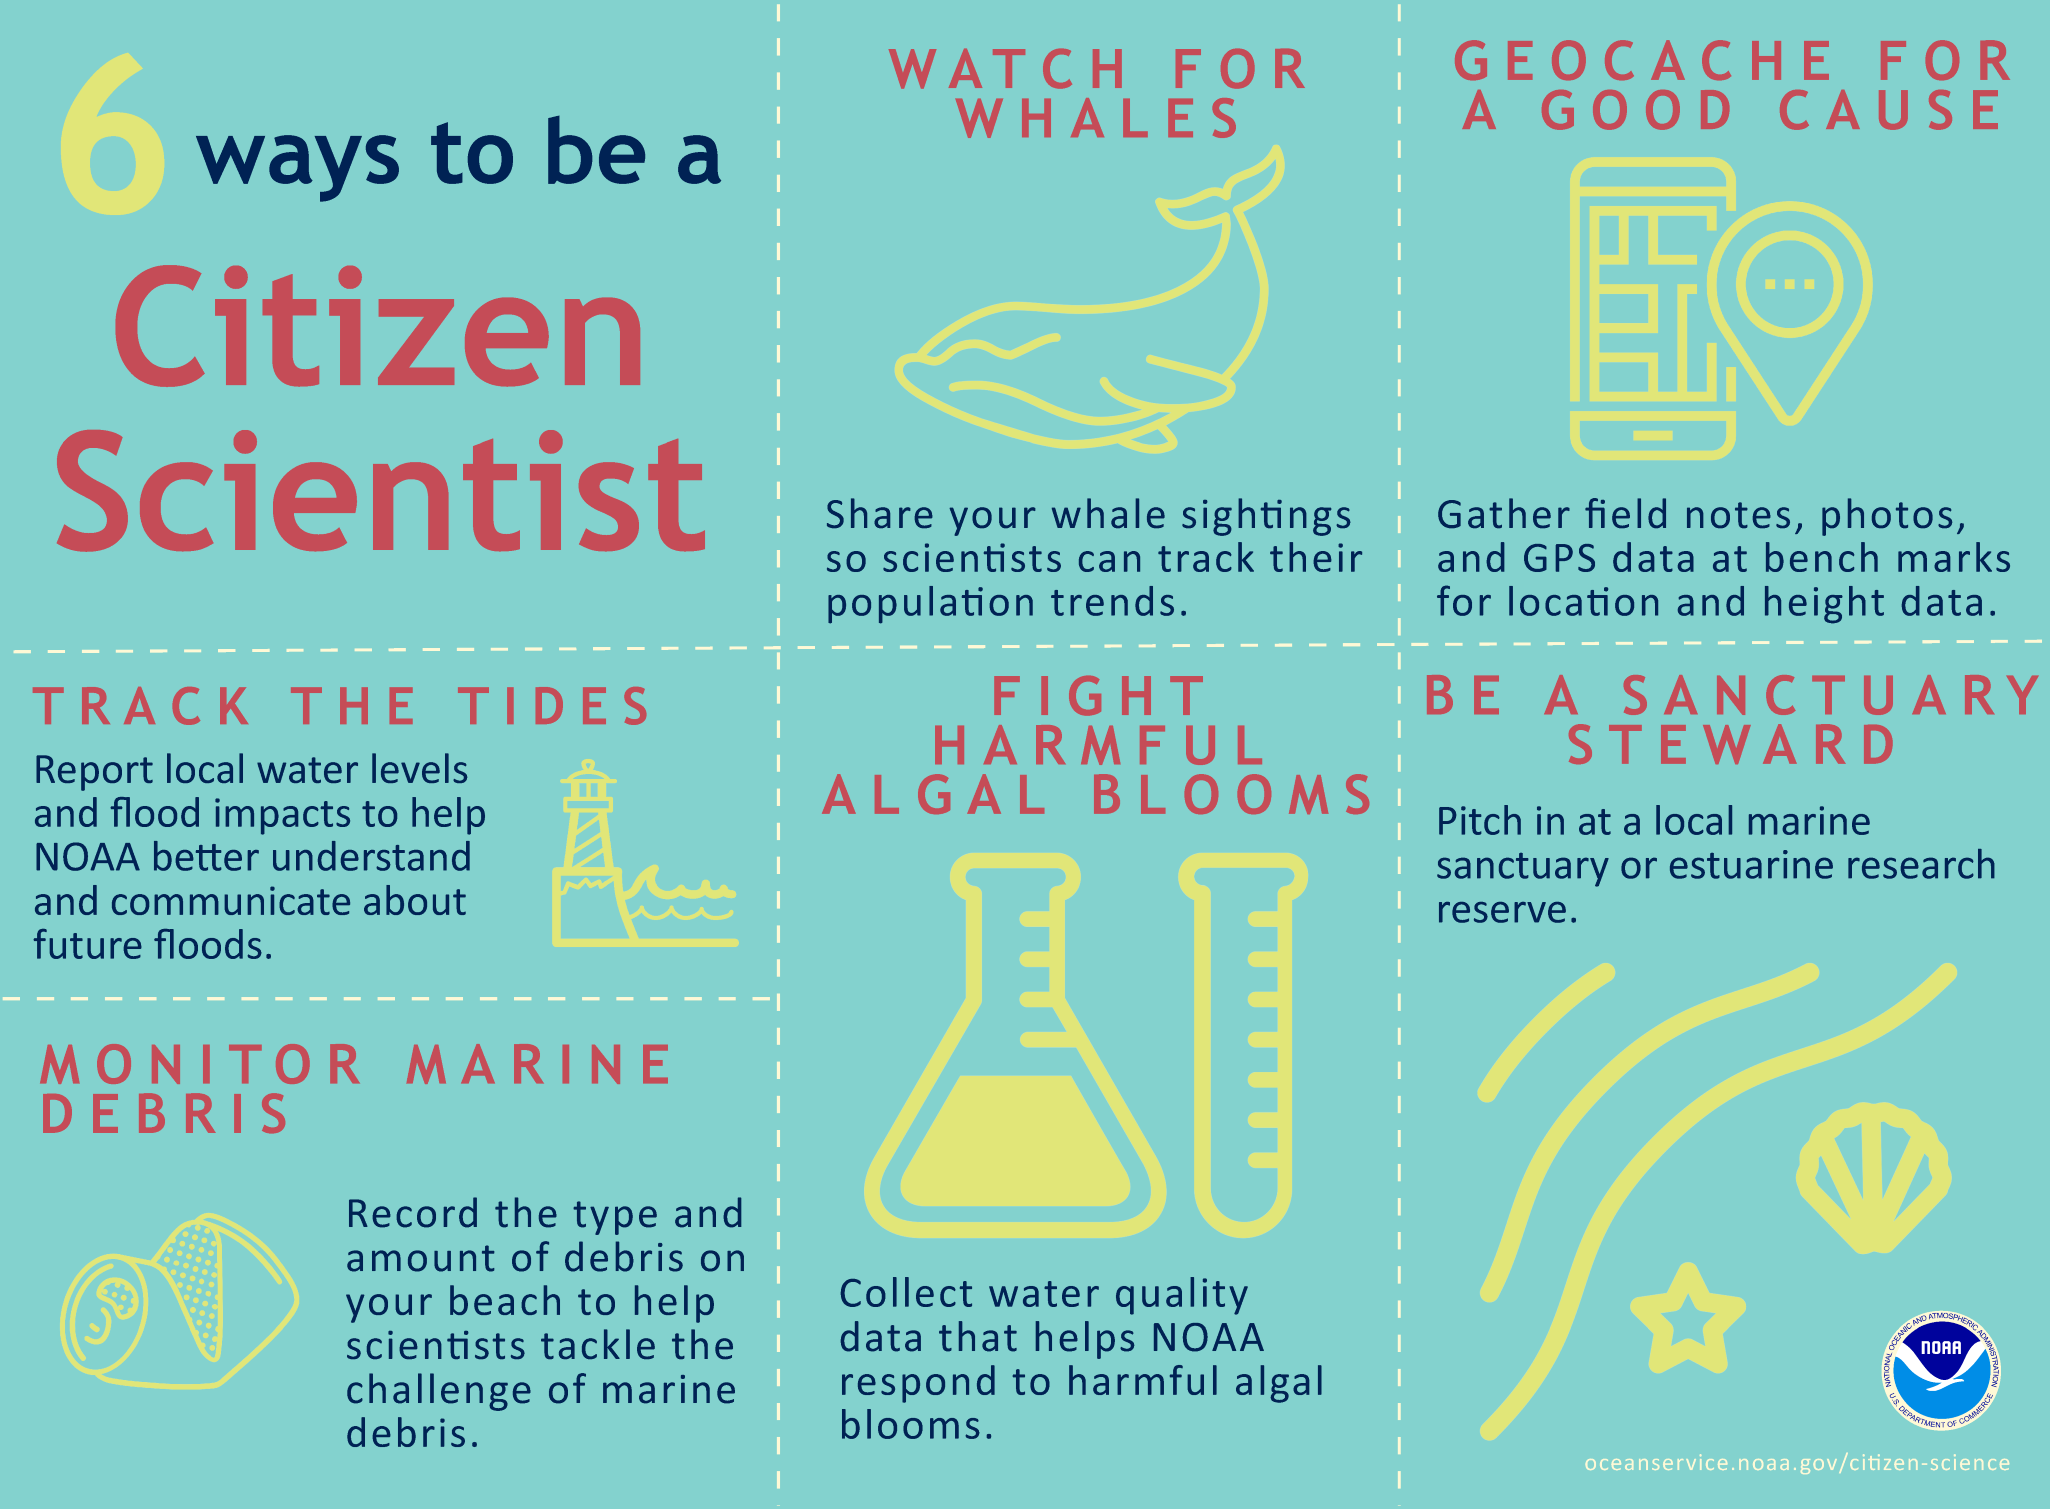 Citizen science typically involves data collection by members of the public who pass their information along to researchers trying to answer real-world questions. The idea behind citizen science is that anyone, anywhere, can participate in meaningful scientific research.